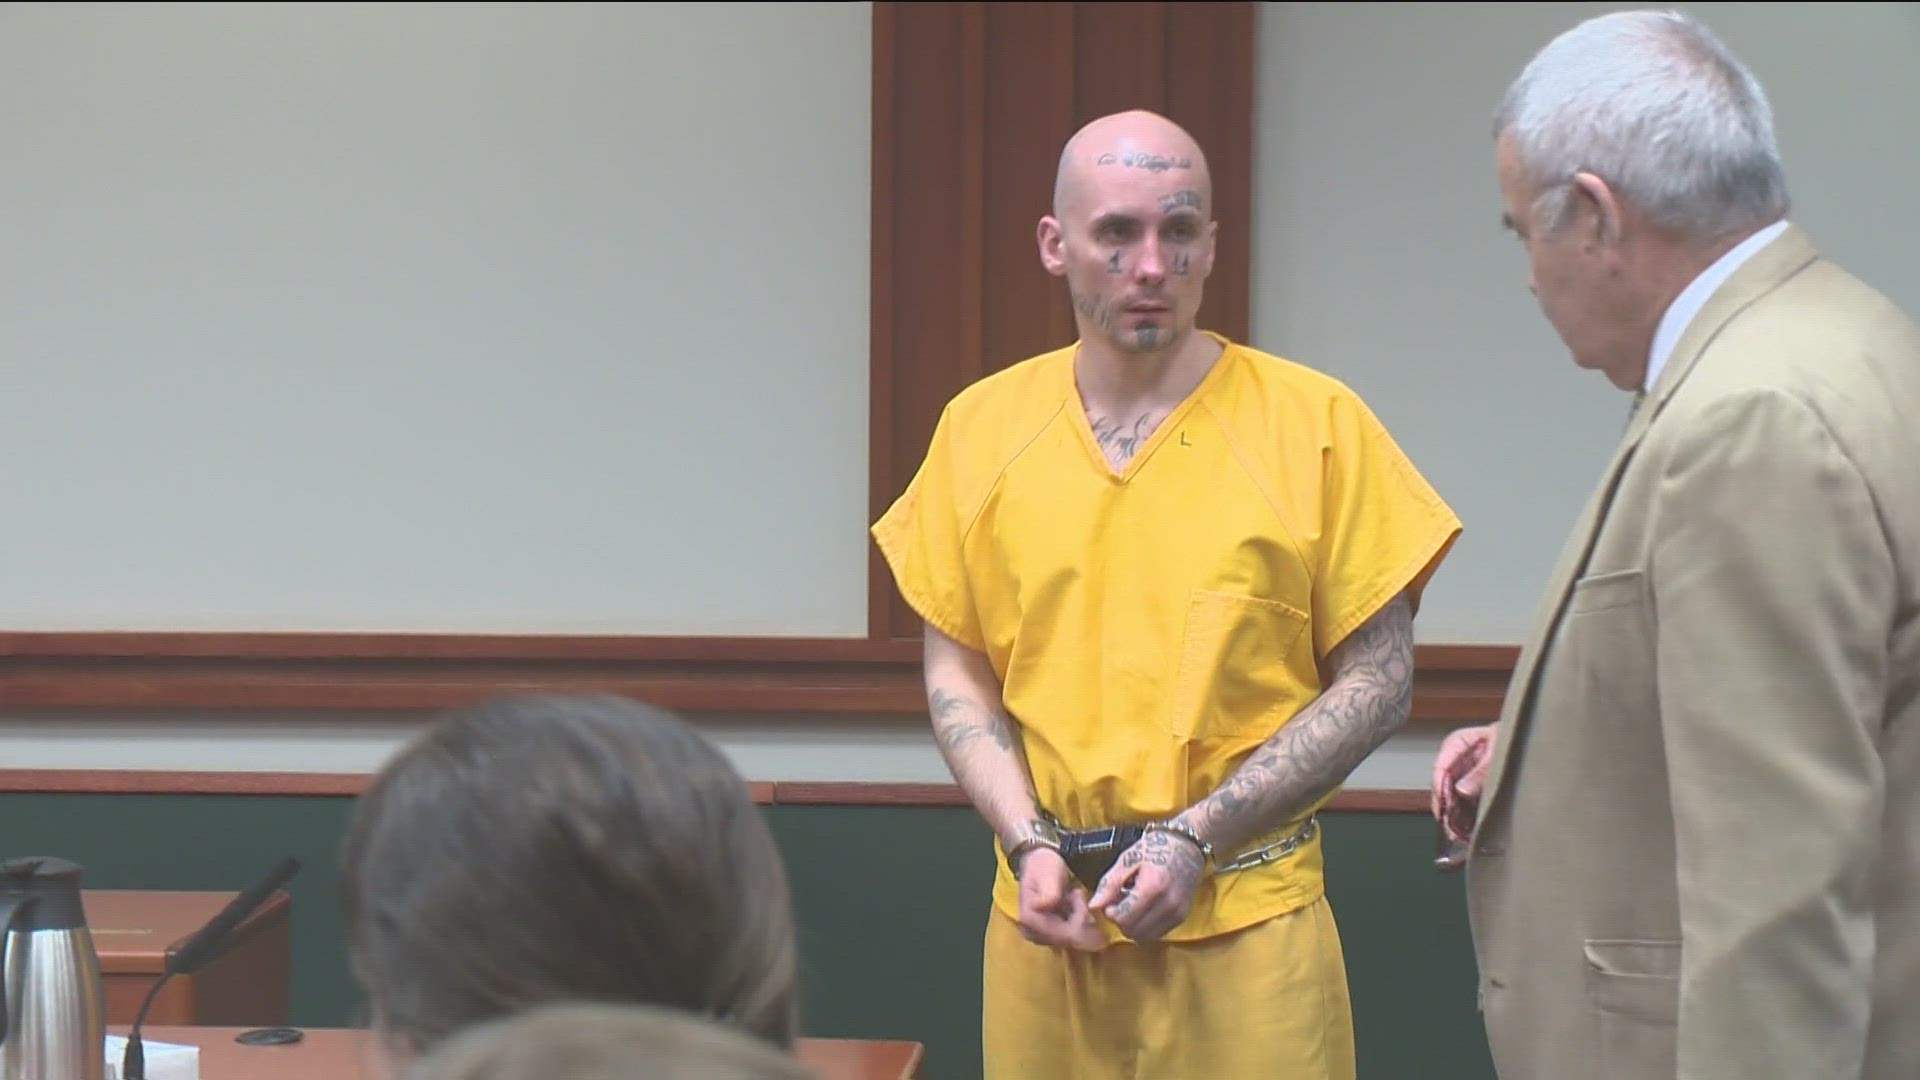 Skylar Meade and his accomplice, Nicholas Umphenour, are each being held on $2 million bail. The two are suspected of killing two men while on the run.